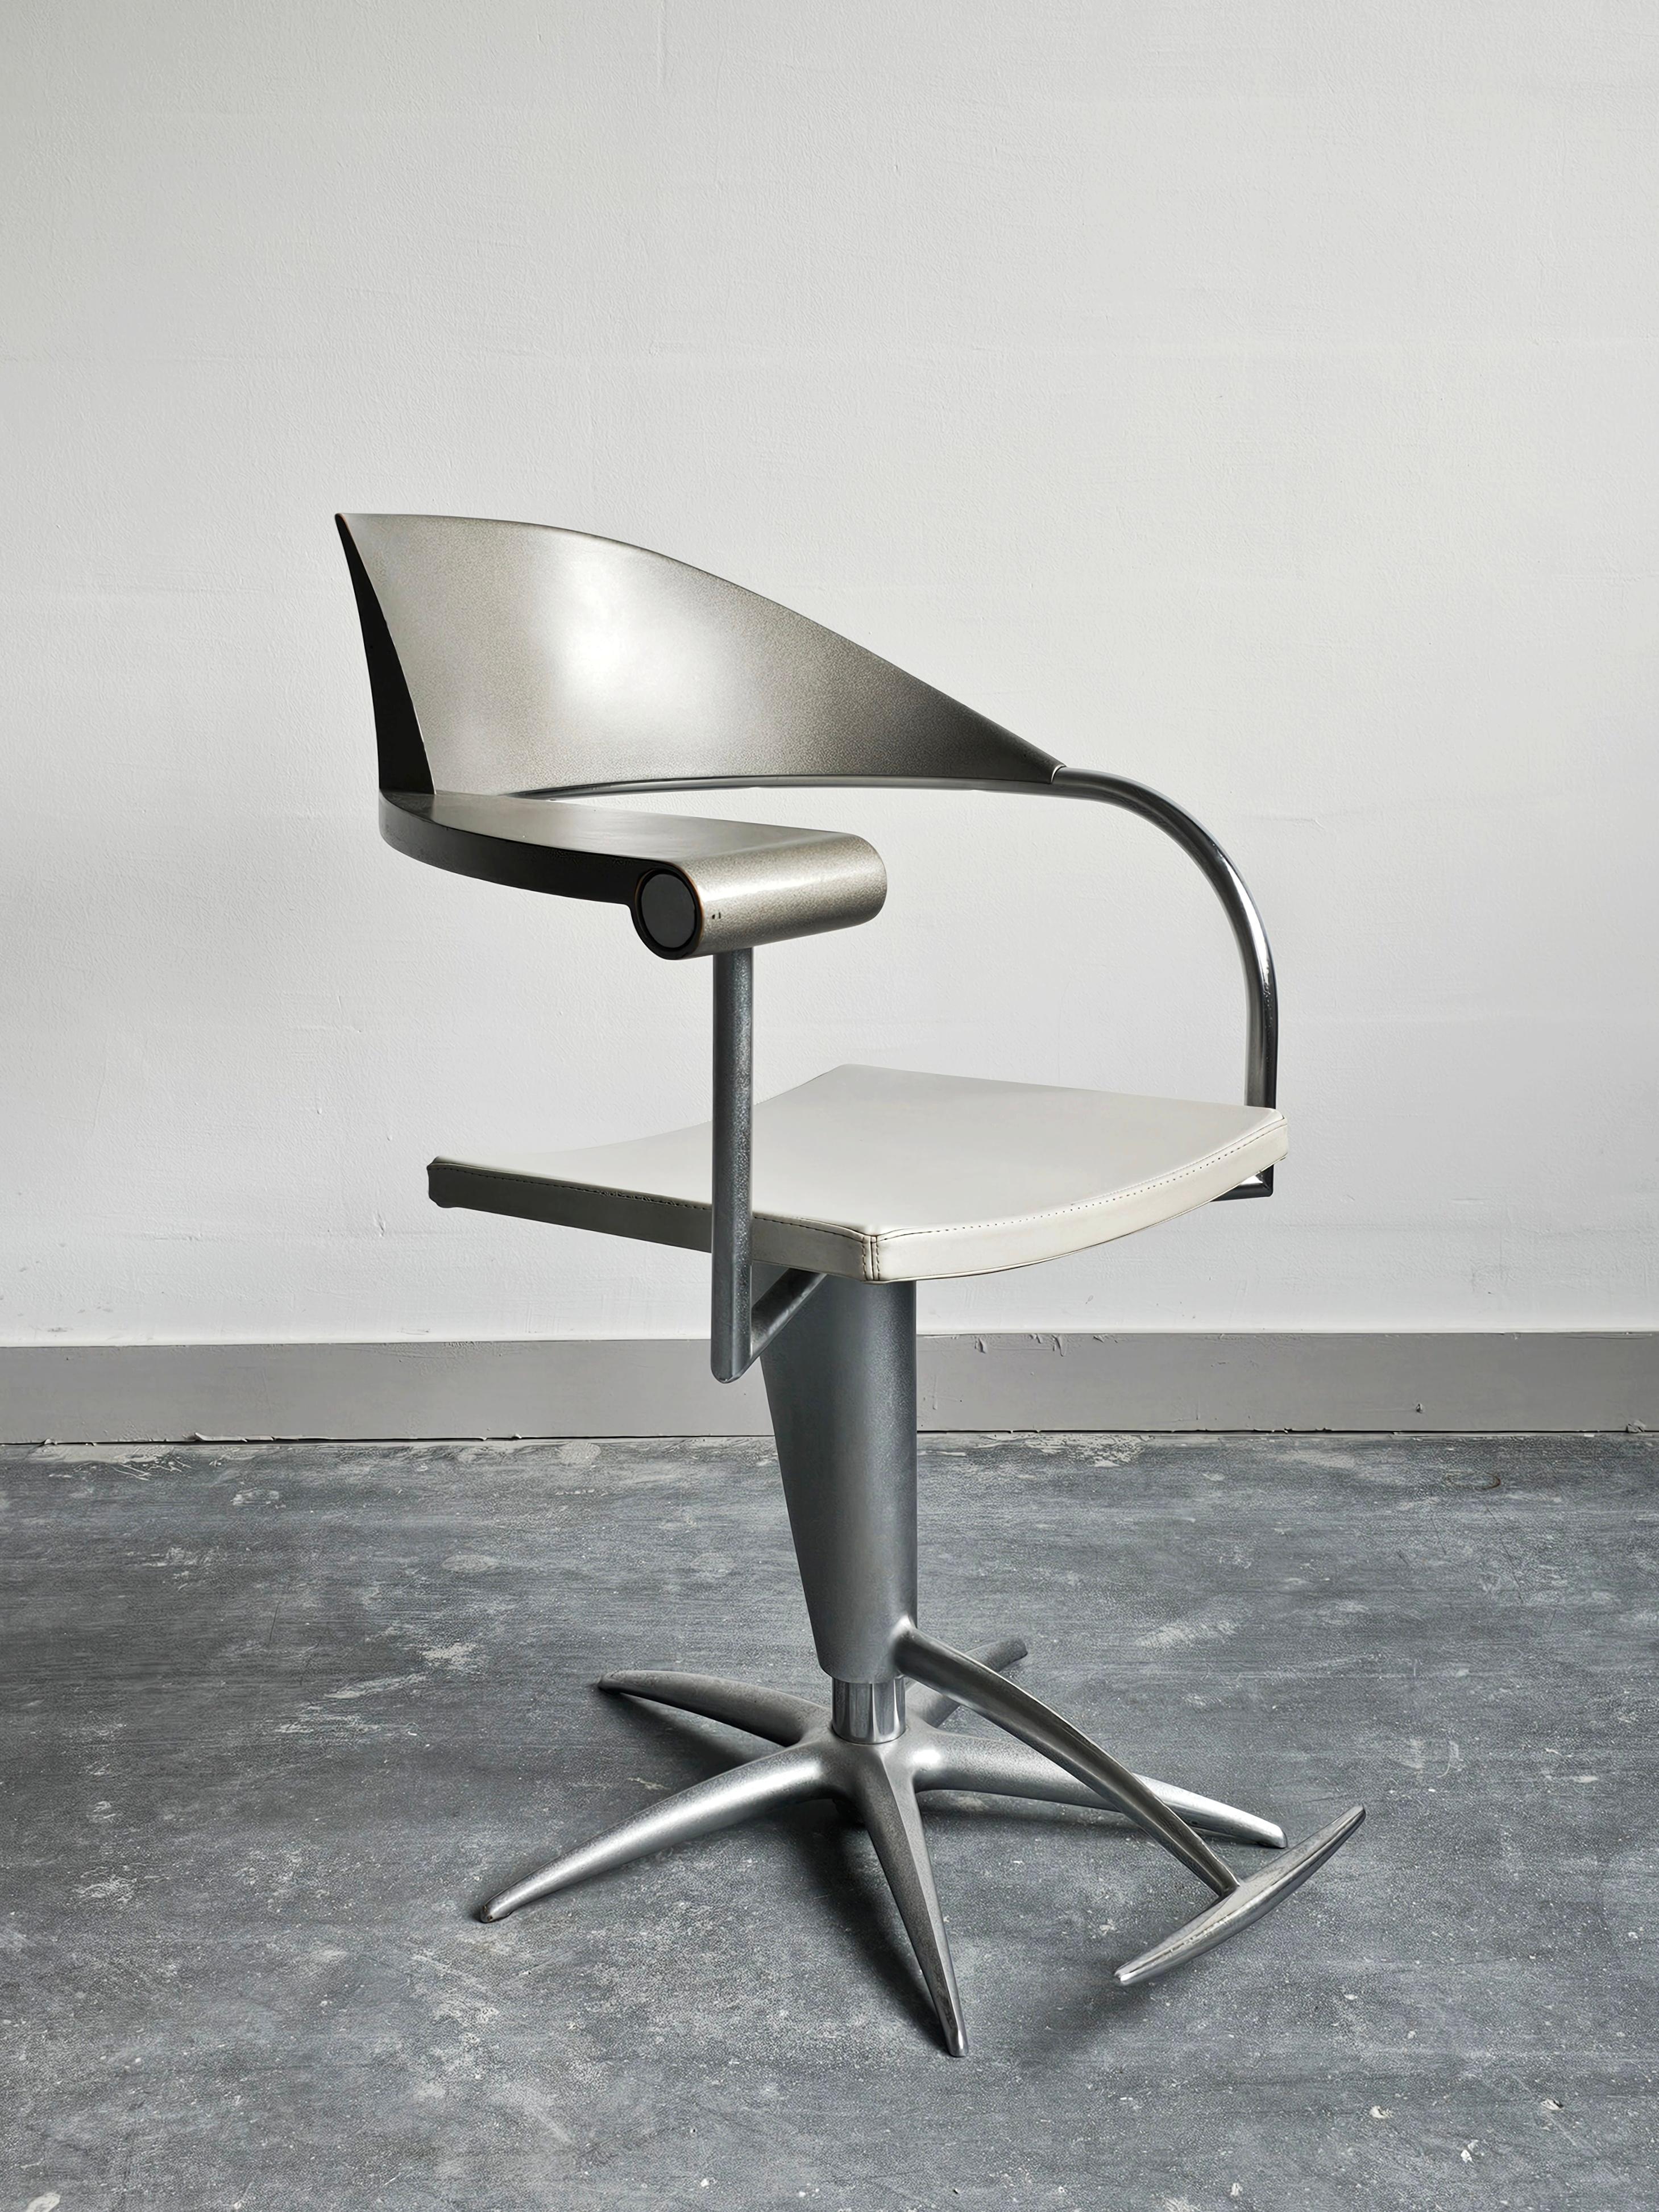 Post-Modern TECHNO barber chair designed by Philippe Starck for L'Oreal, France 1989 For Sale